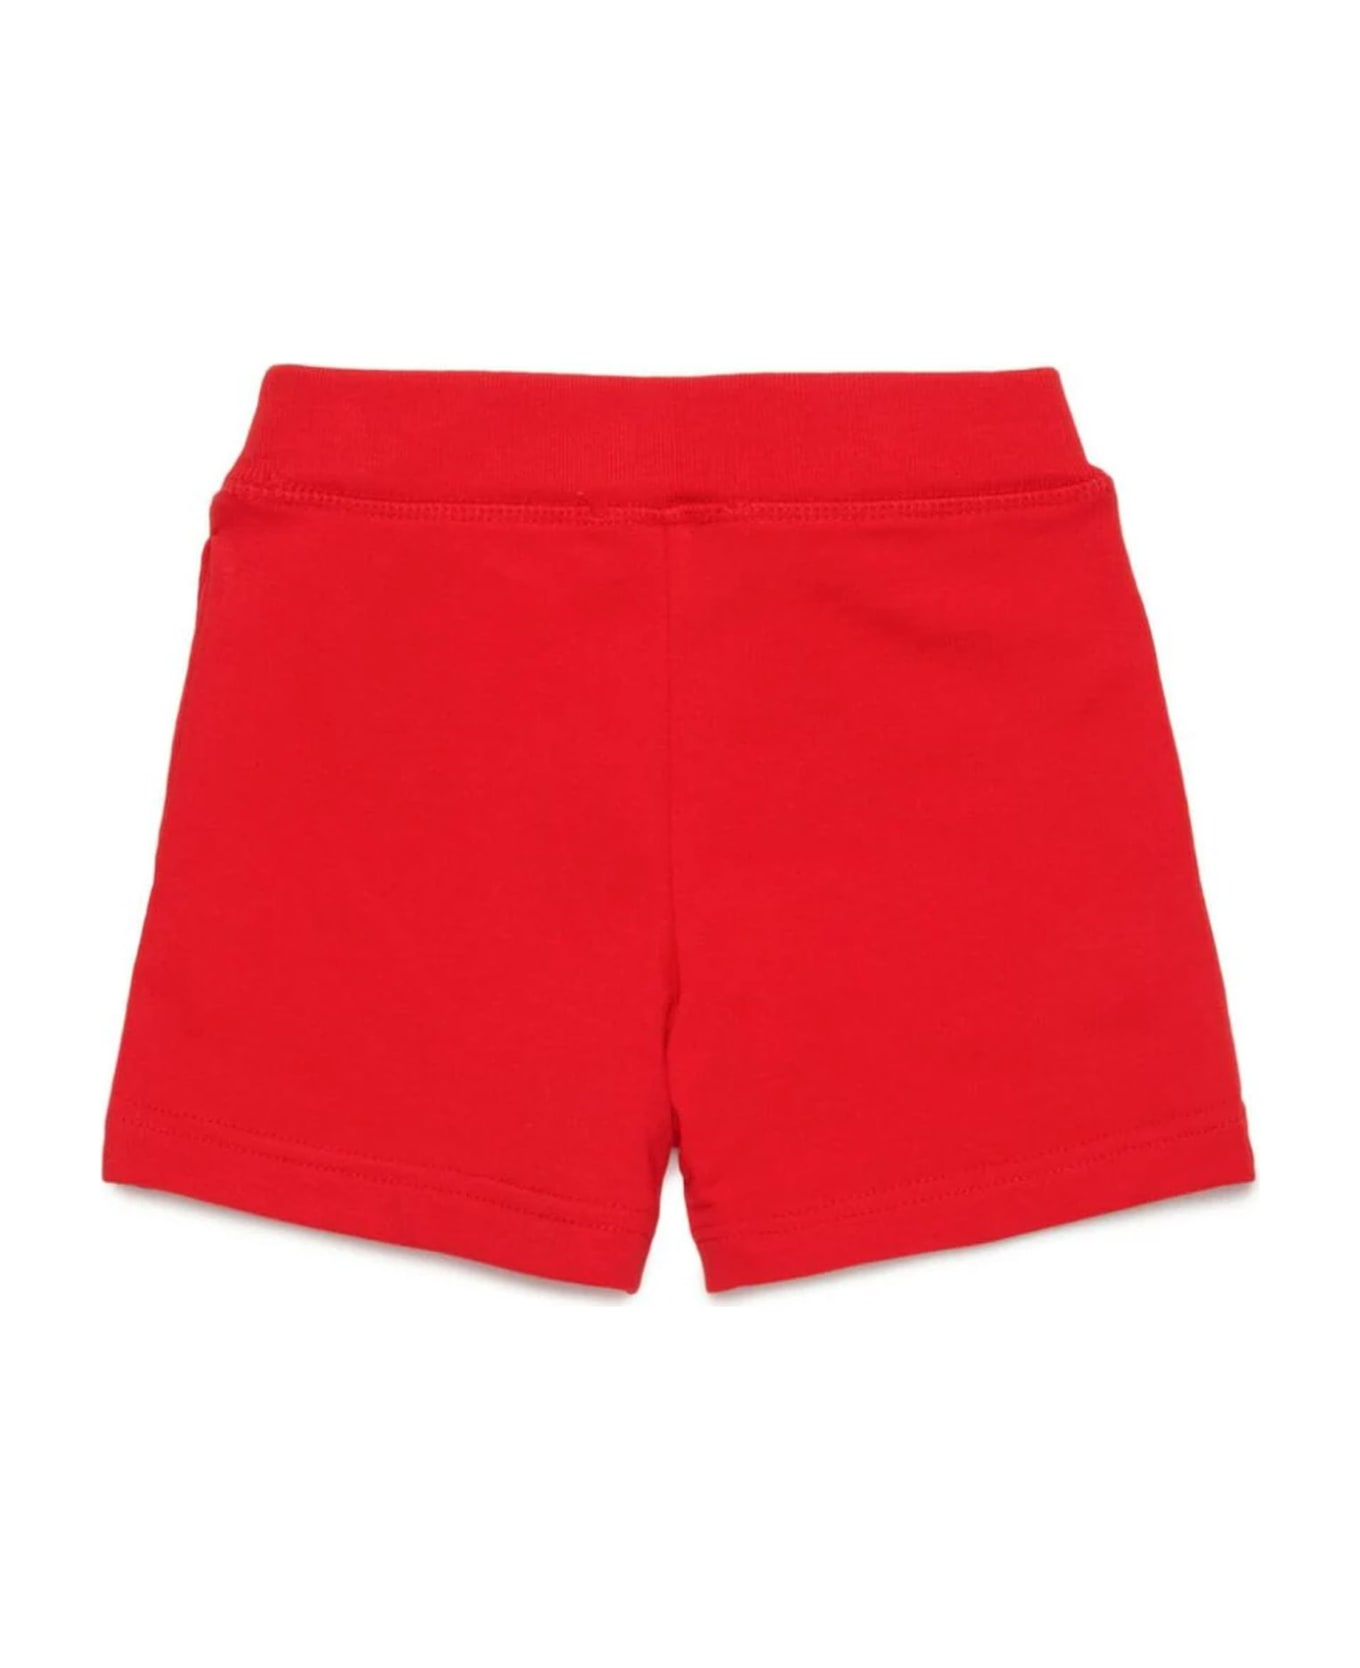 Dsquared2 Shorts Red - Red